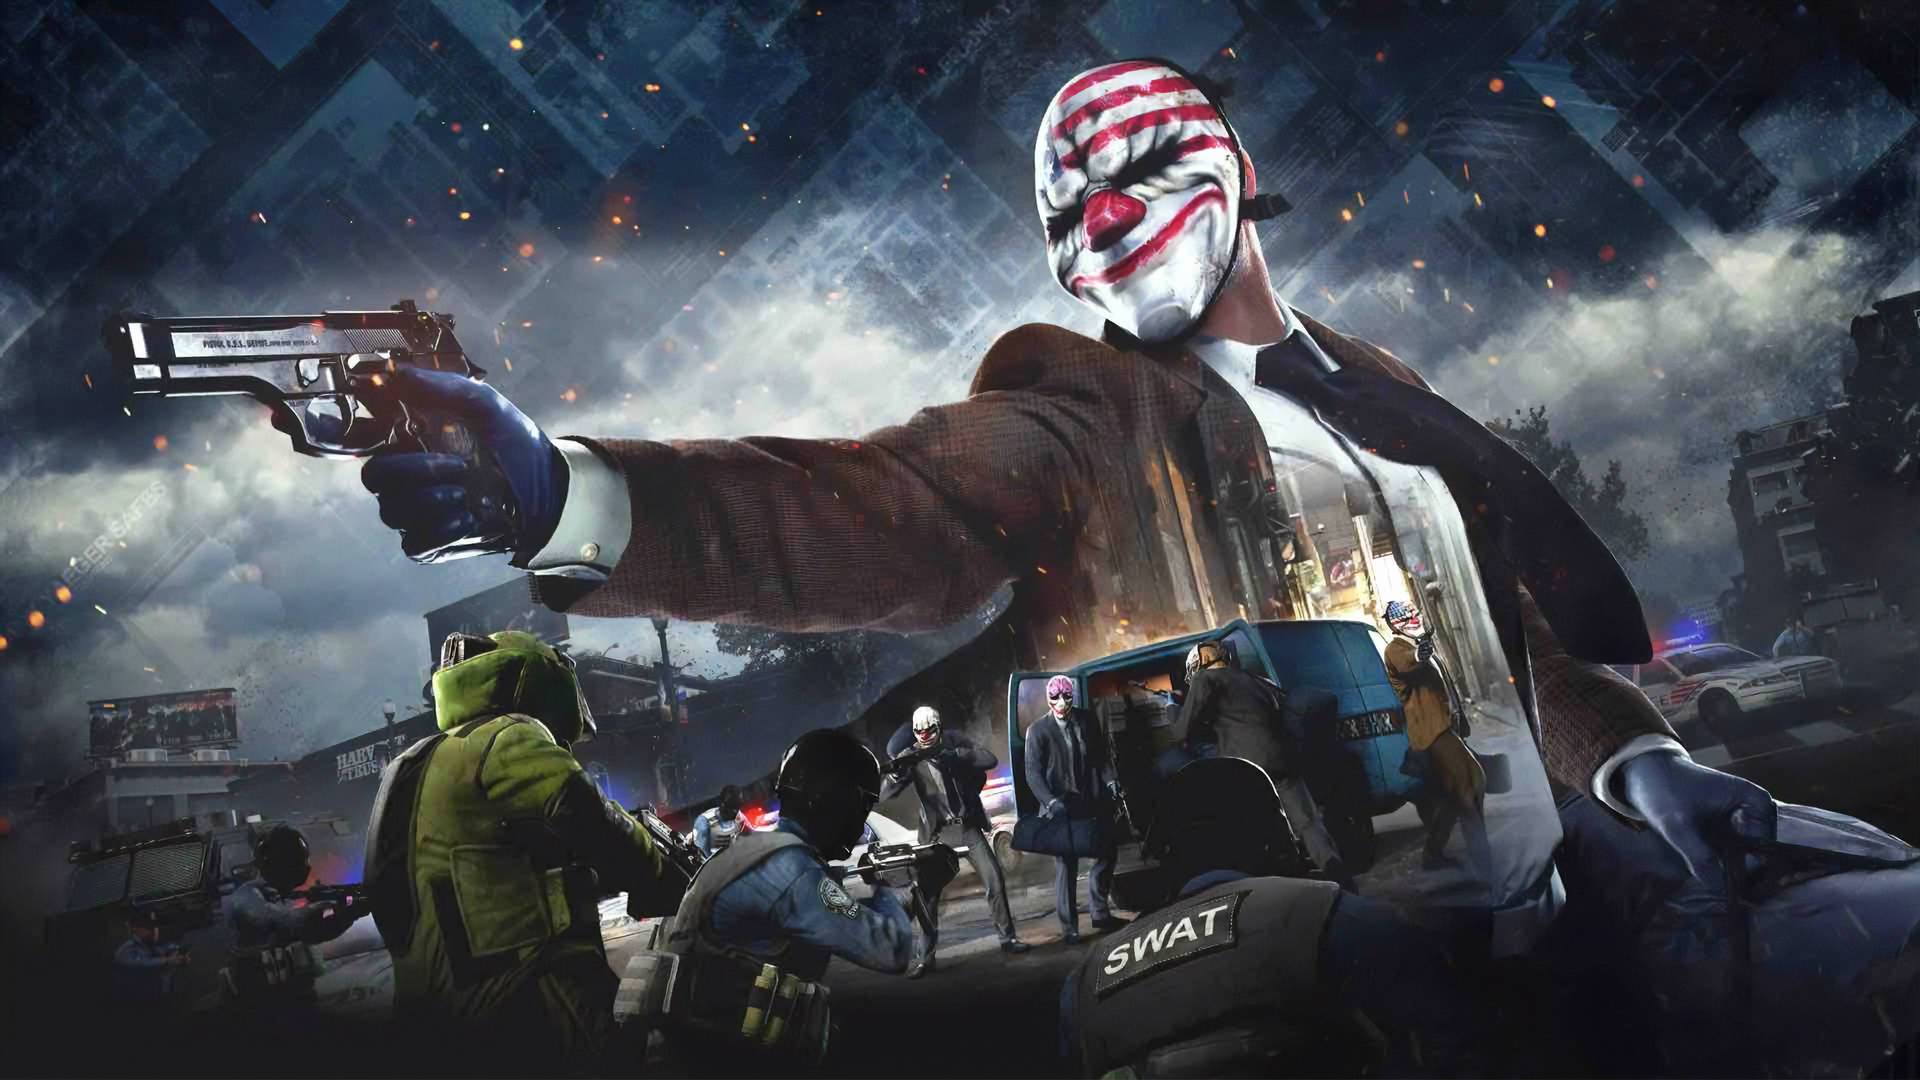 Intense Action in Payday 2 featuring Dallas Wallpaper